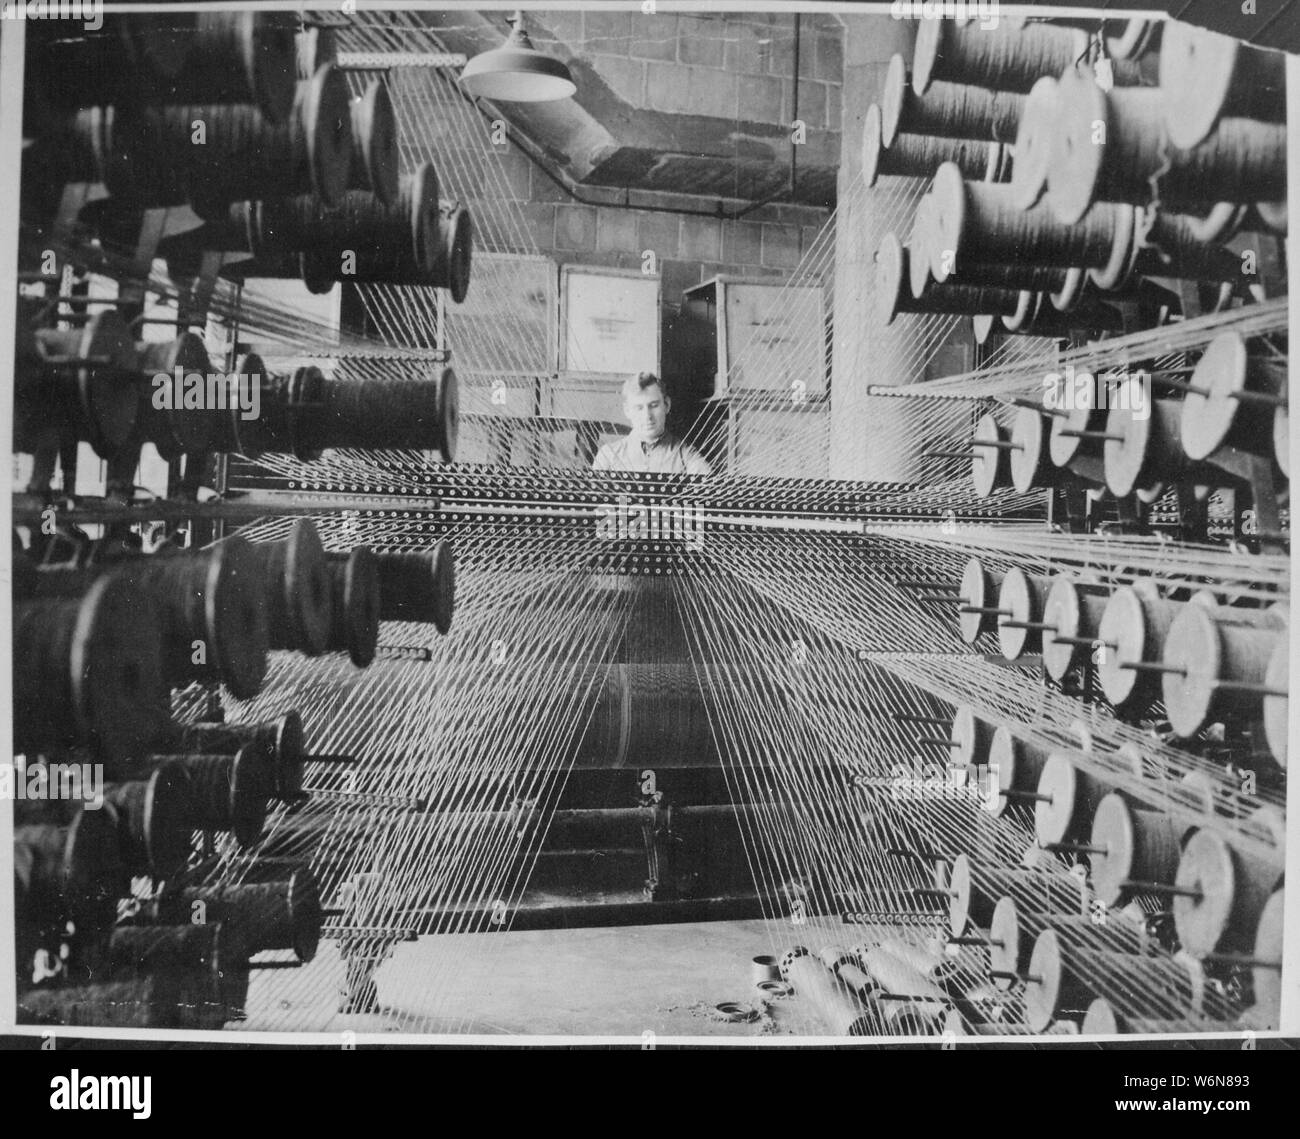 Workman operating an industrial loom strung with hundreds of wool threads at Chicago's Olsen Rug Company, ca. 1950 Stock Photo